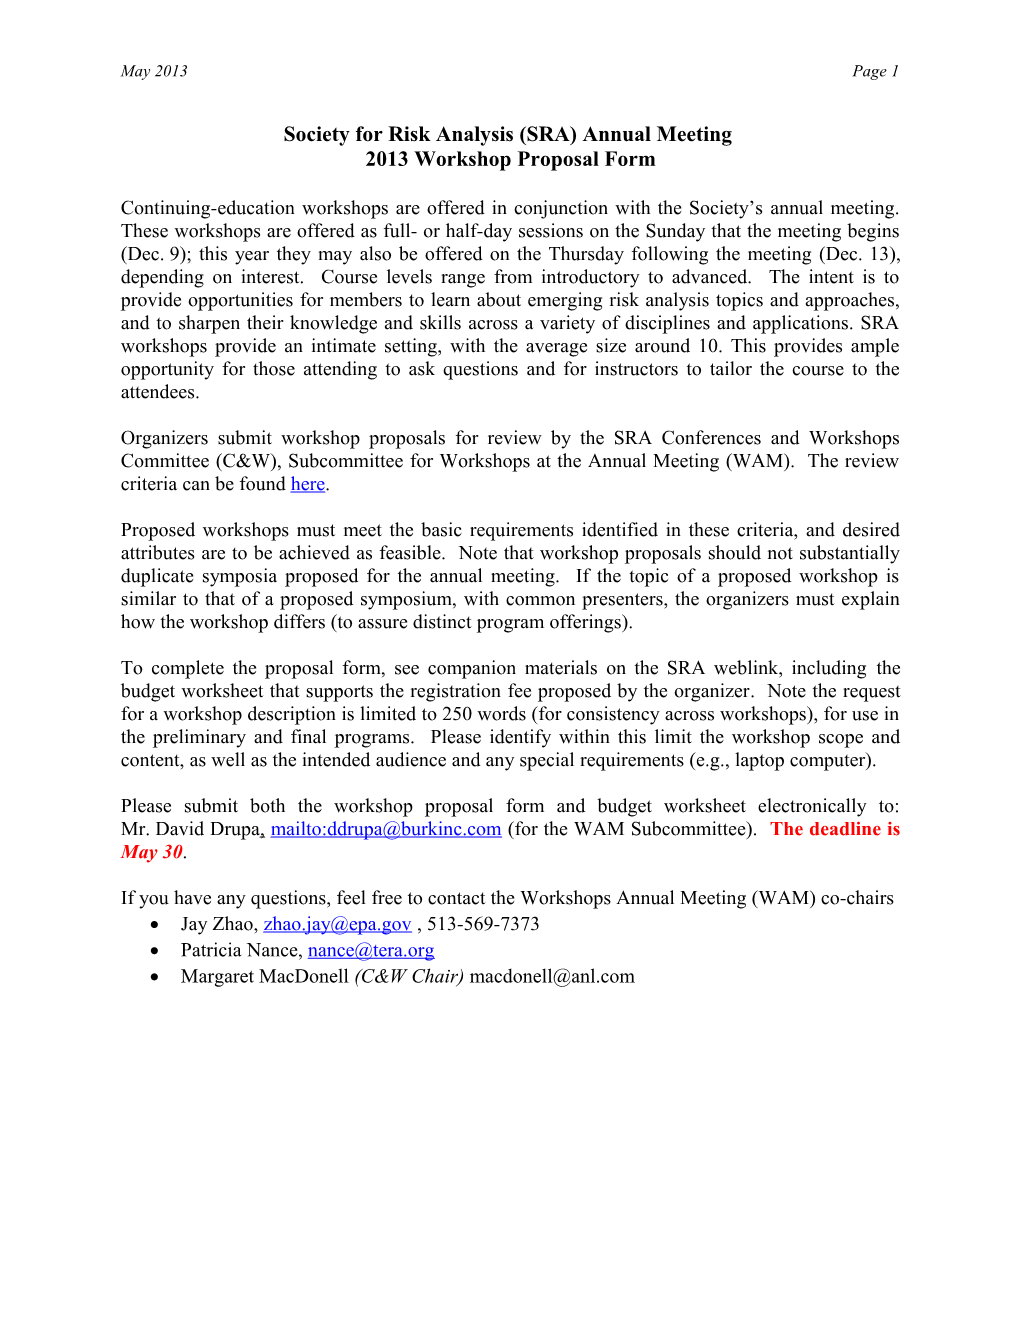 Society for Risk Analysis (SRA) Annual Meeting: Workshop Proposal Form